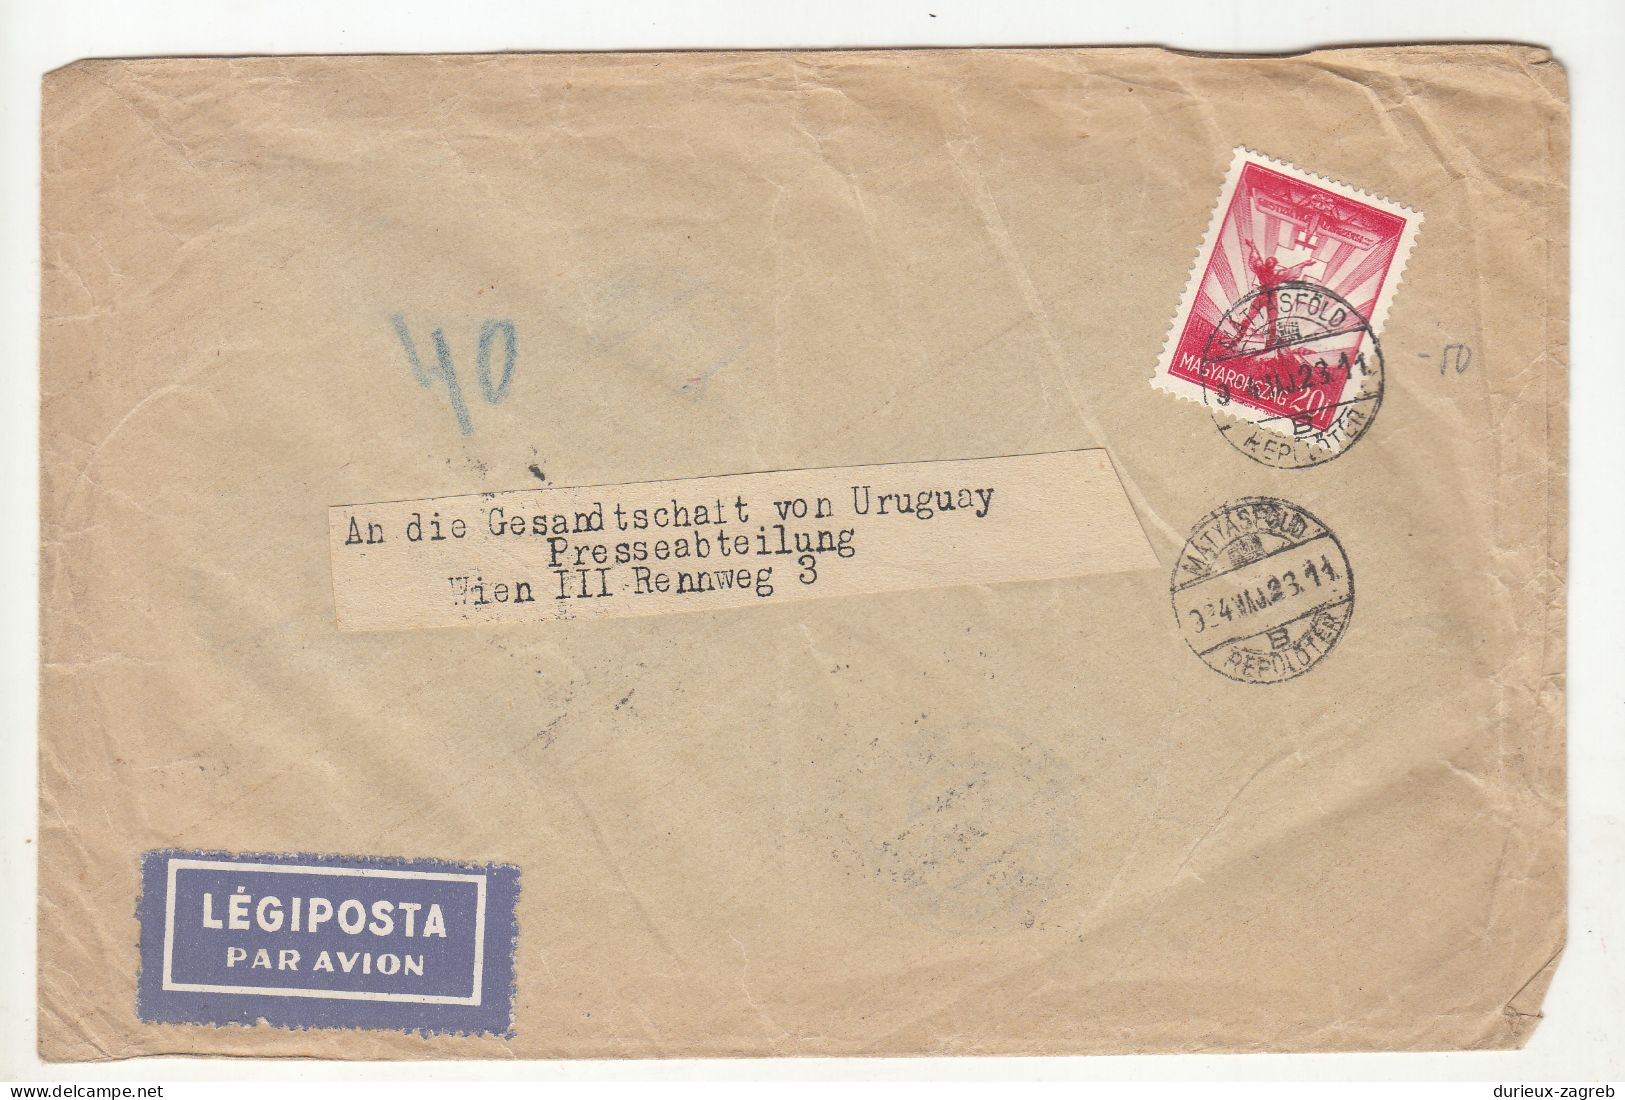 Hungary Air Mail Letter Cover Posted 1934 Matyasfold To Wien B230810 - Lettres & Documents